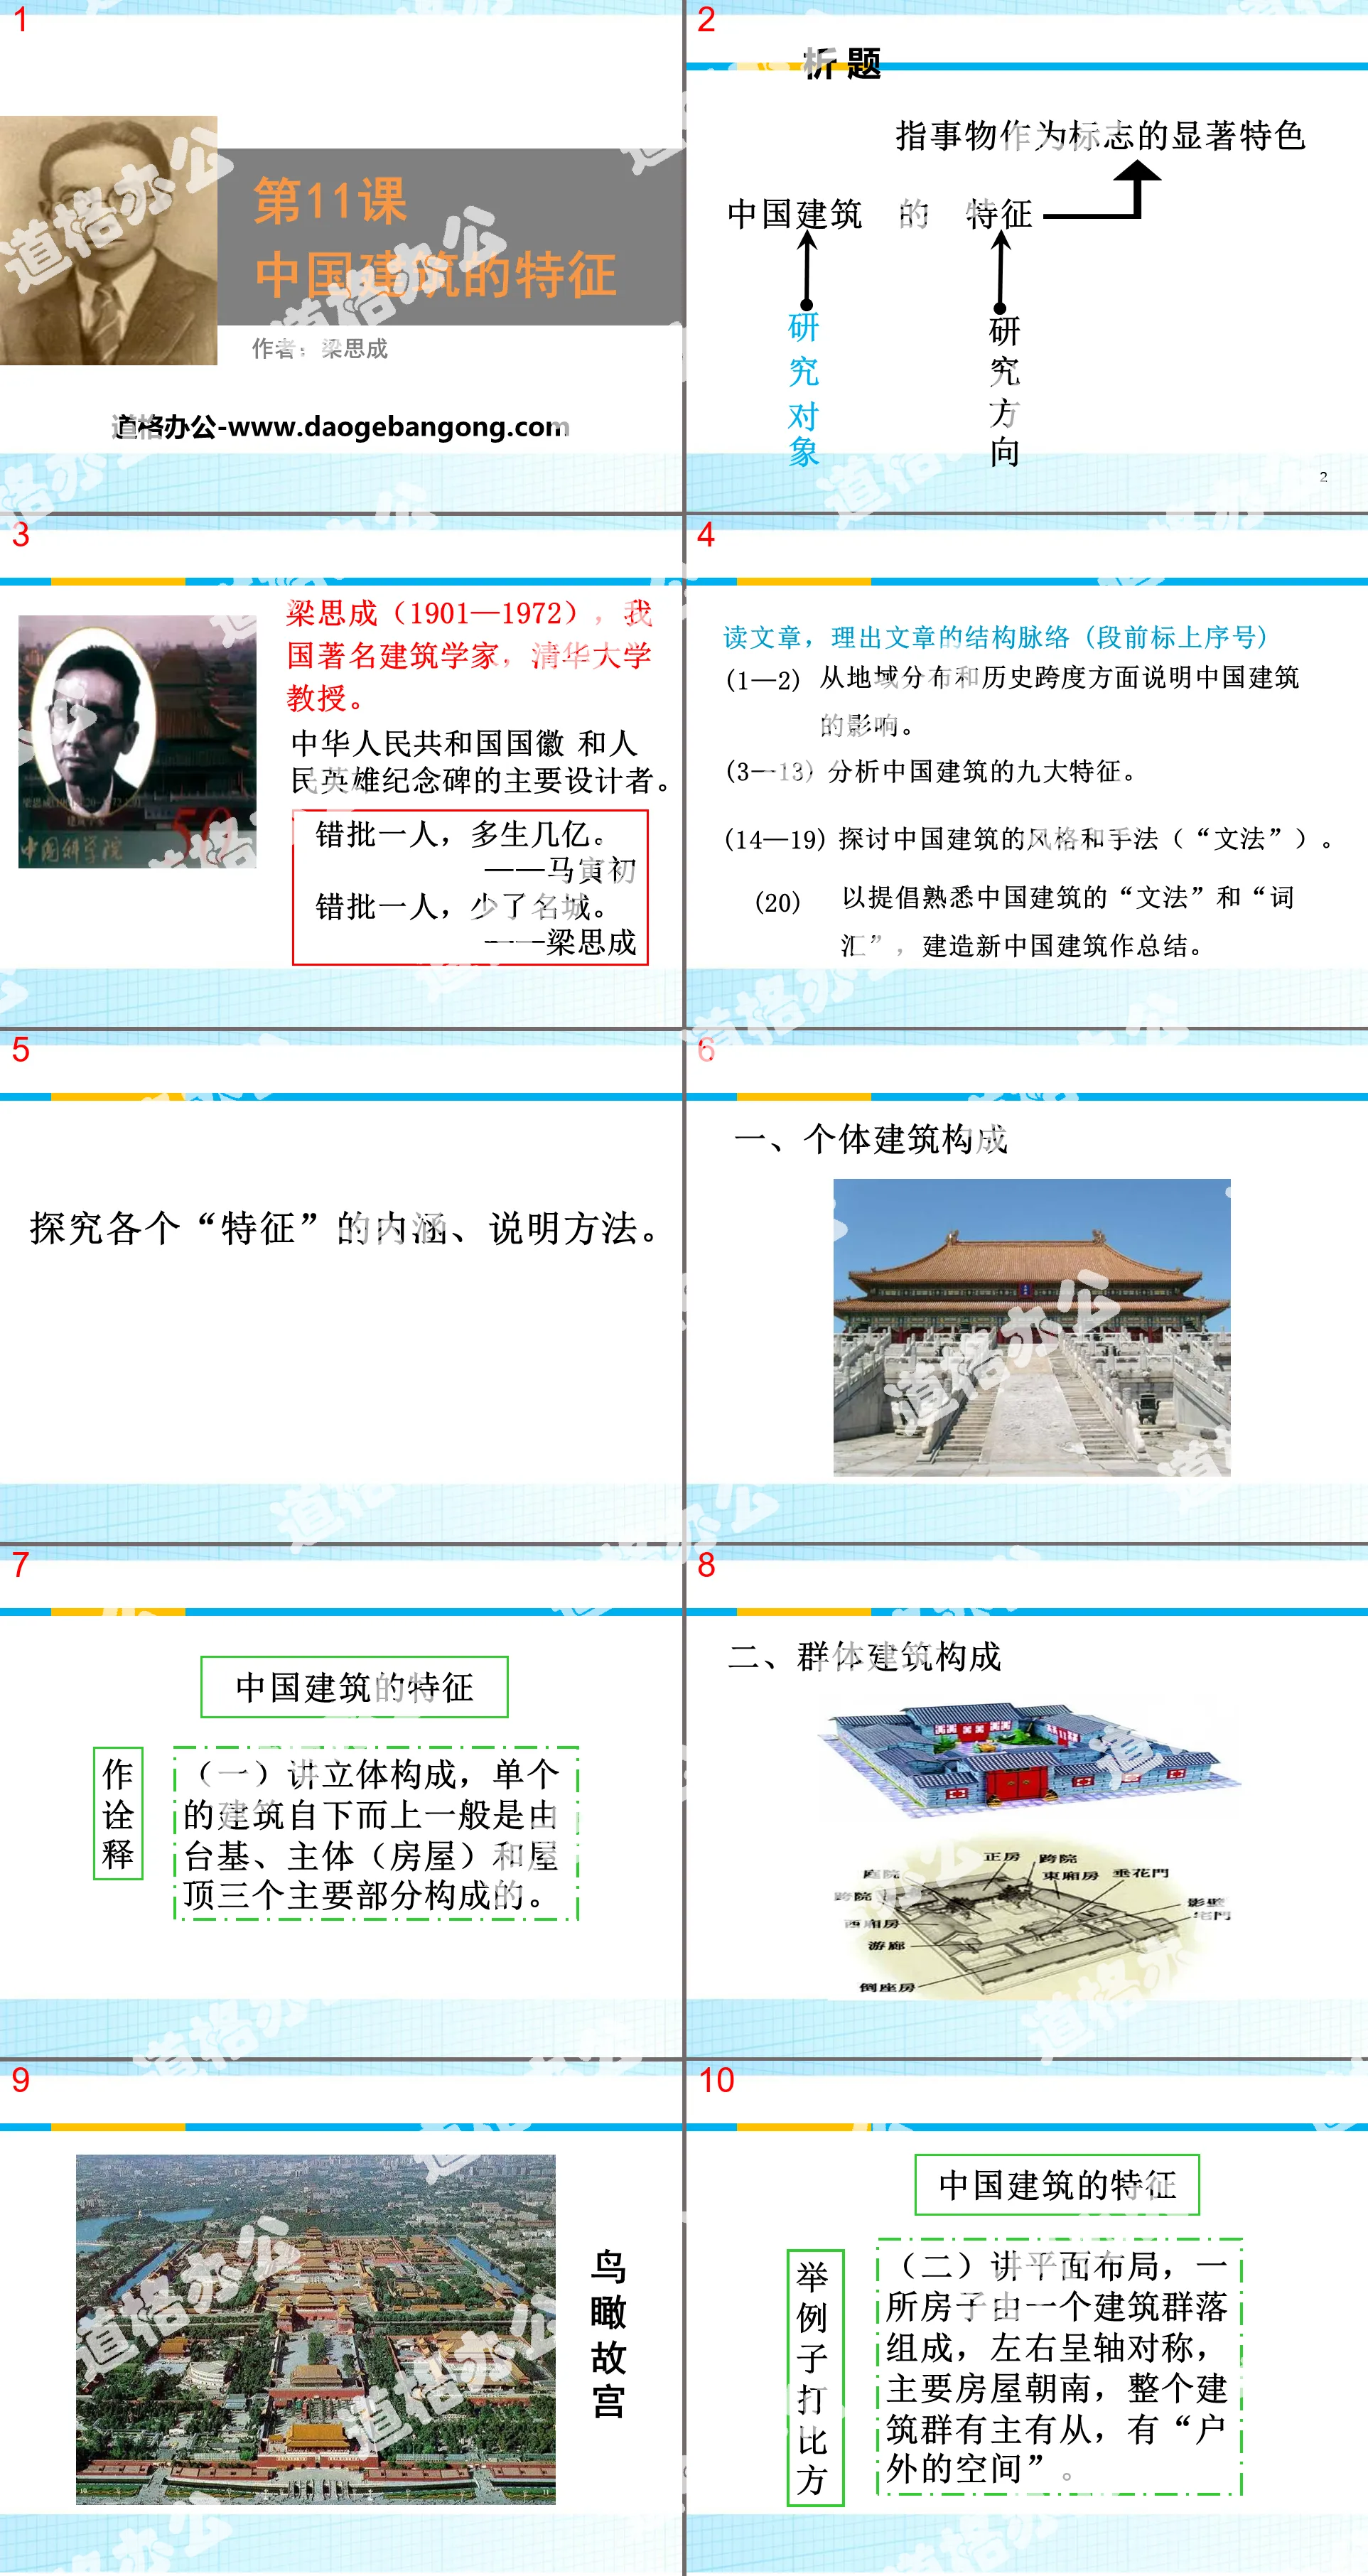 "Characteristics of Chinese Architecture" PPT teaching courseware